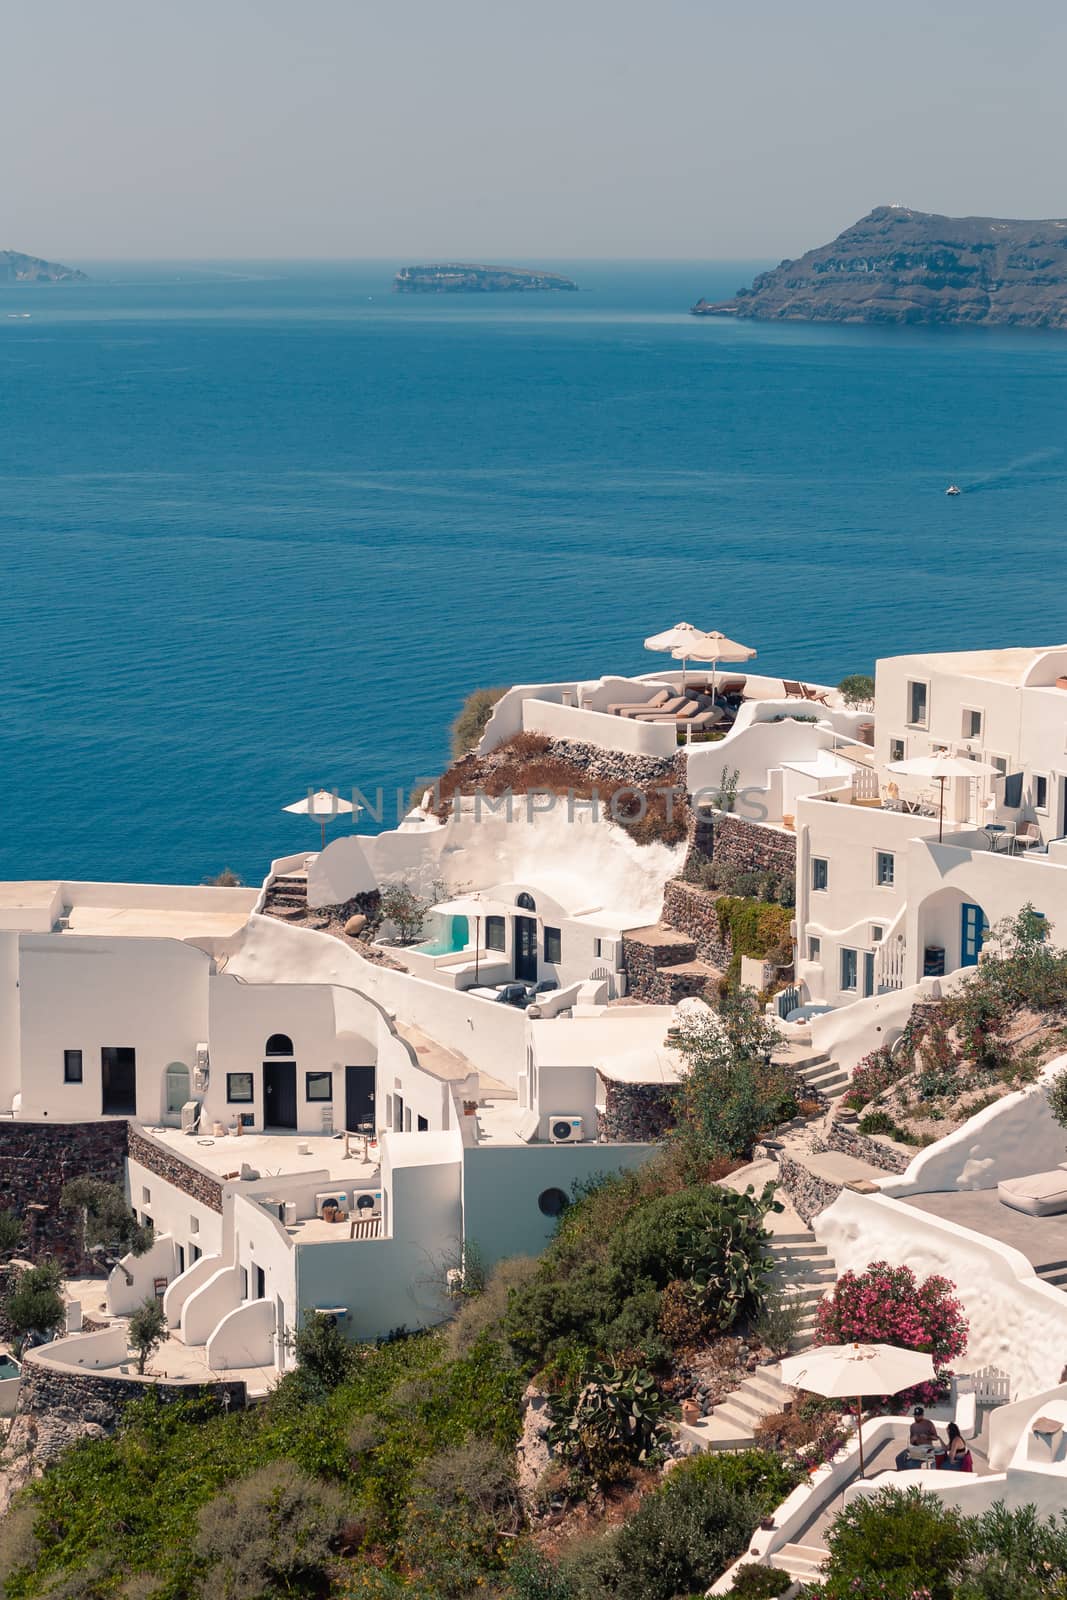 Classical view on the decoration and architecture of Oia village Santorini at sun weather